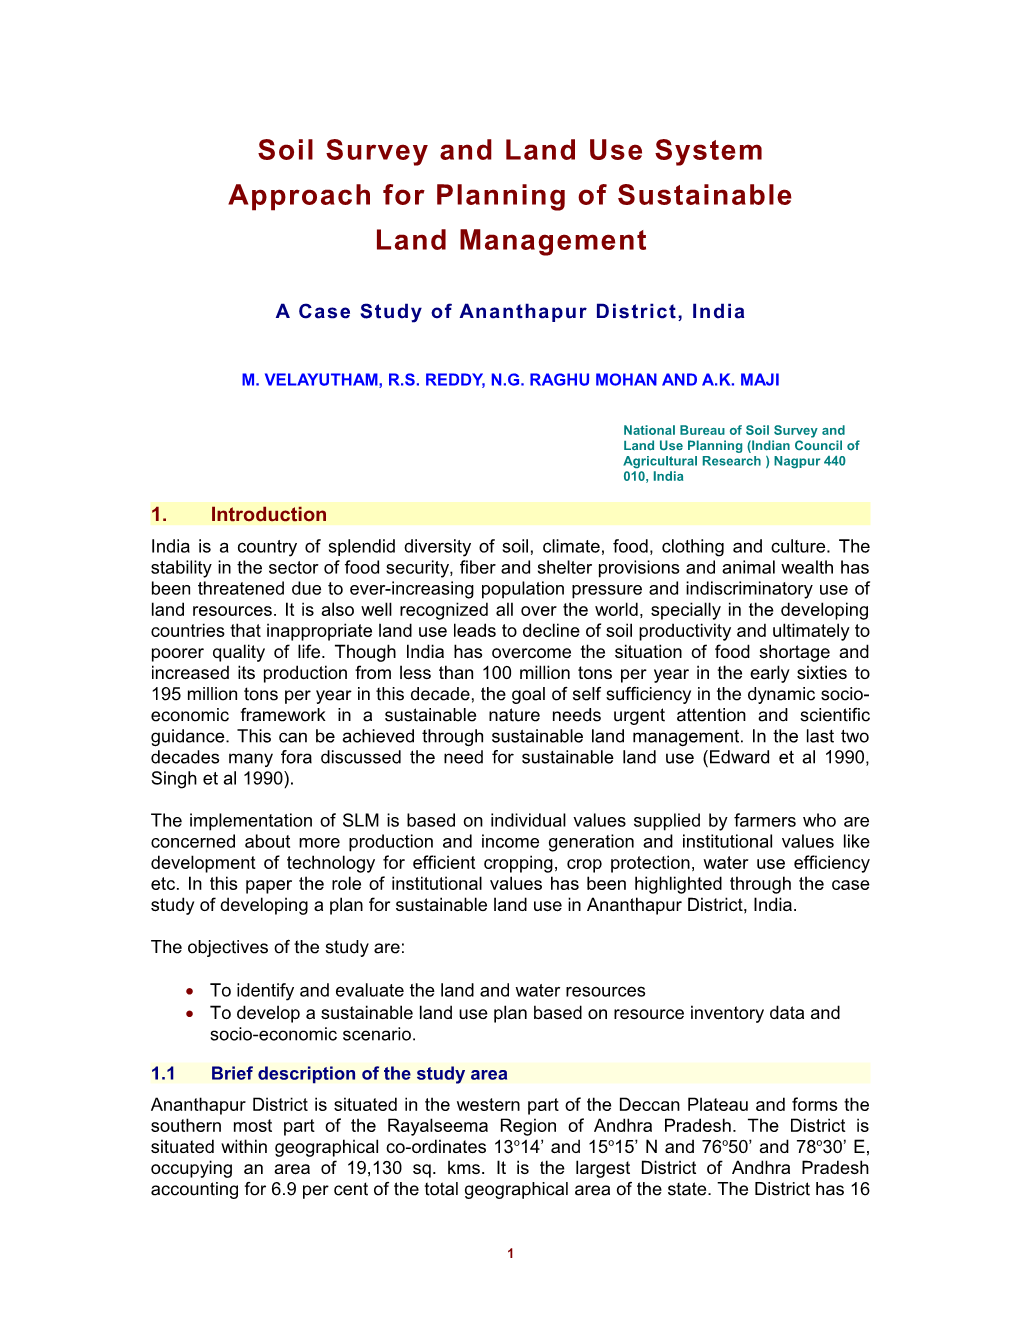 Soil Survey and Land Use System Approach for Planning of Sustainable Land Management